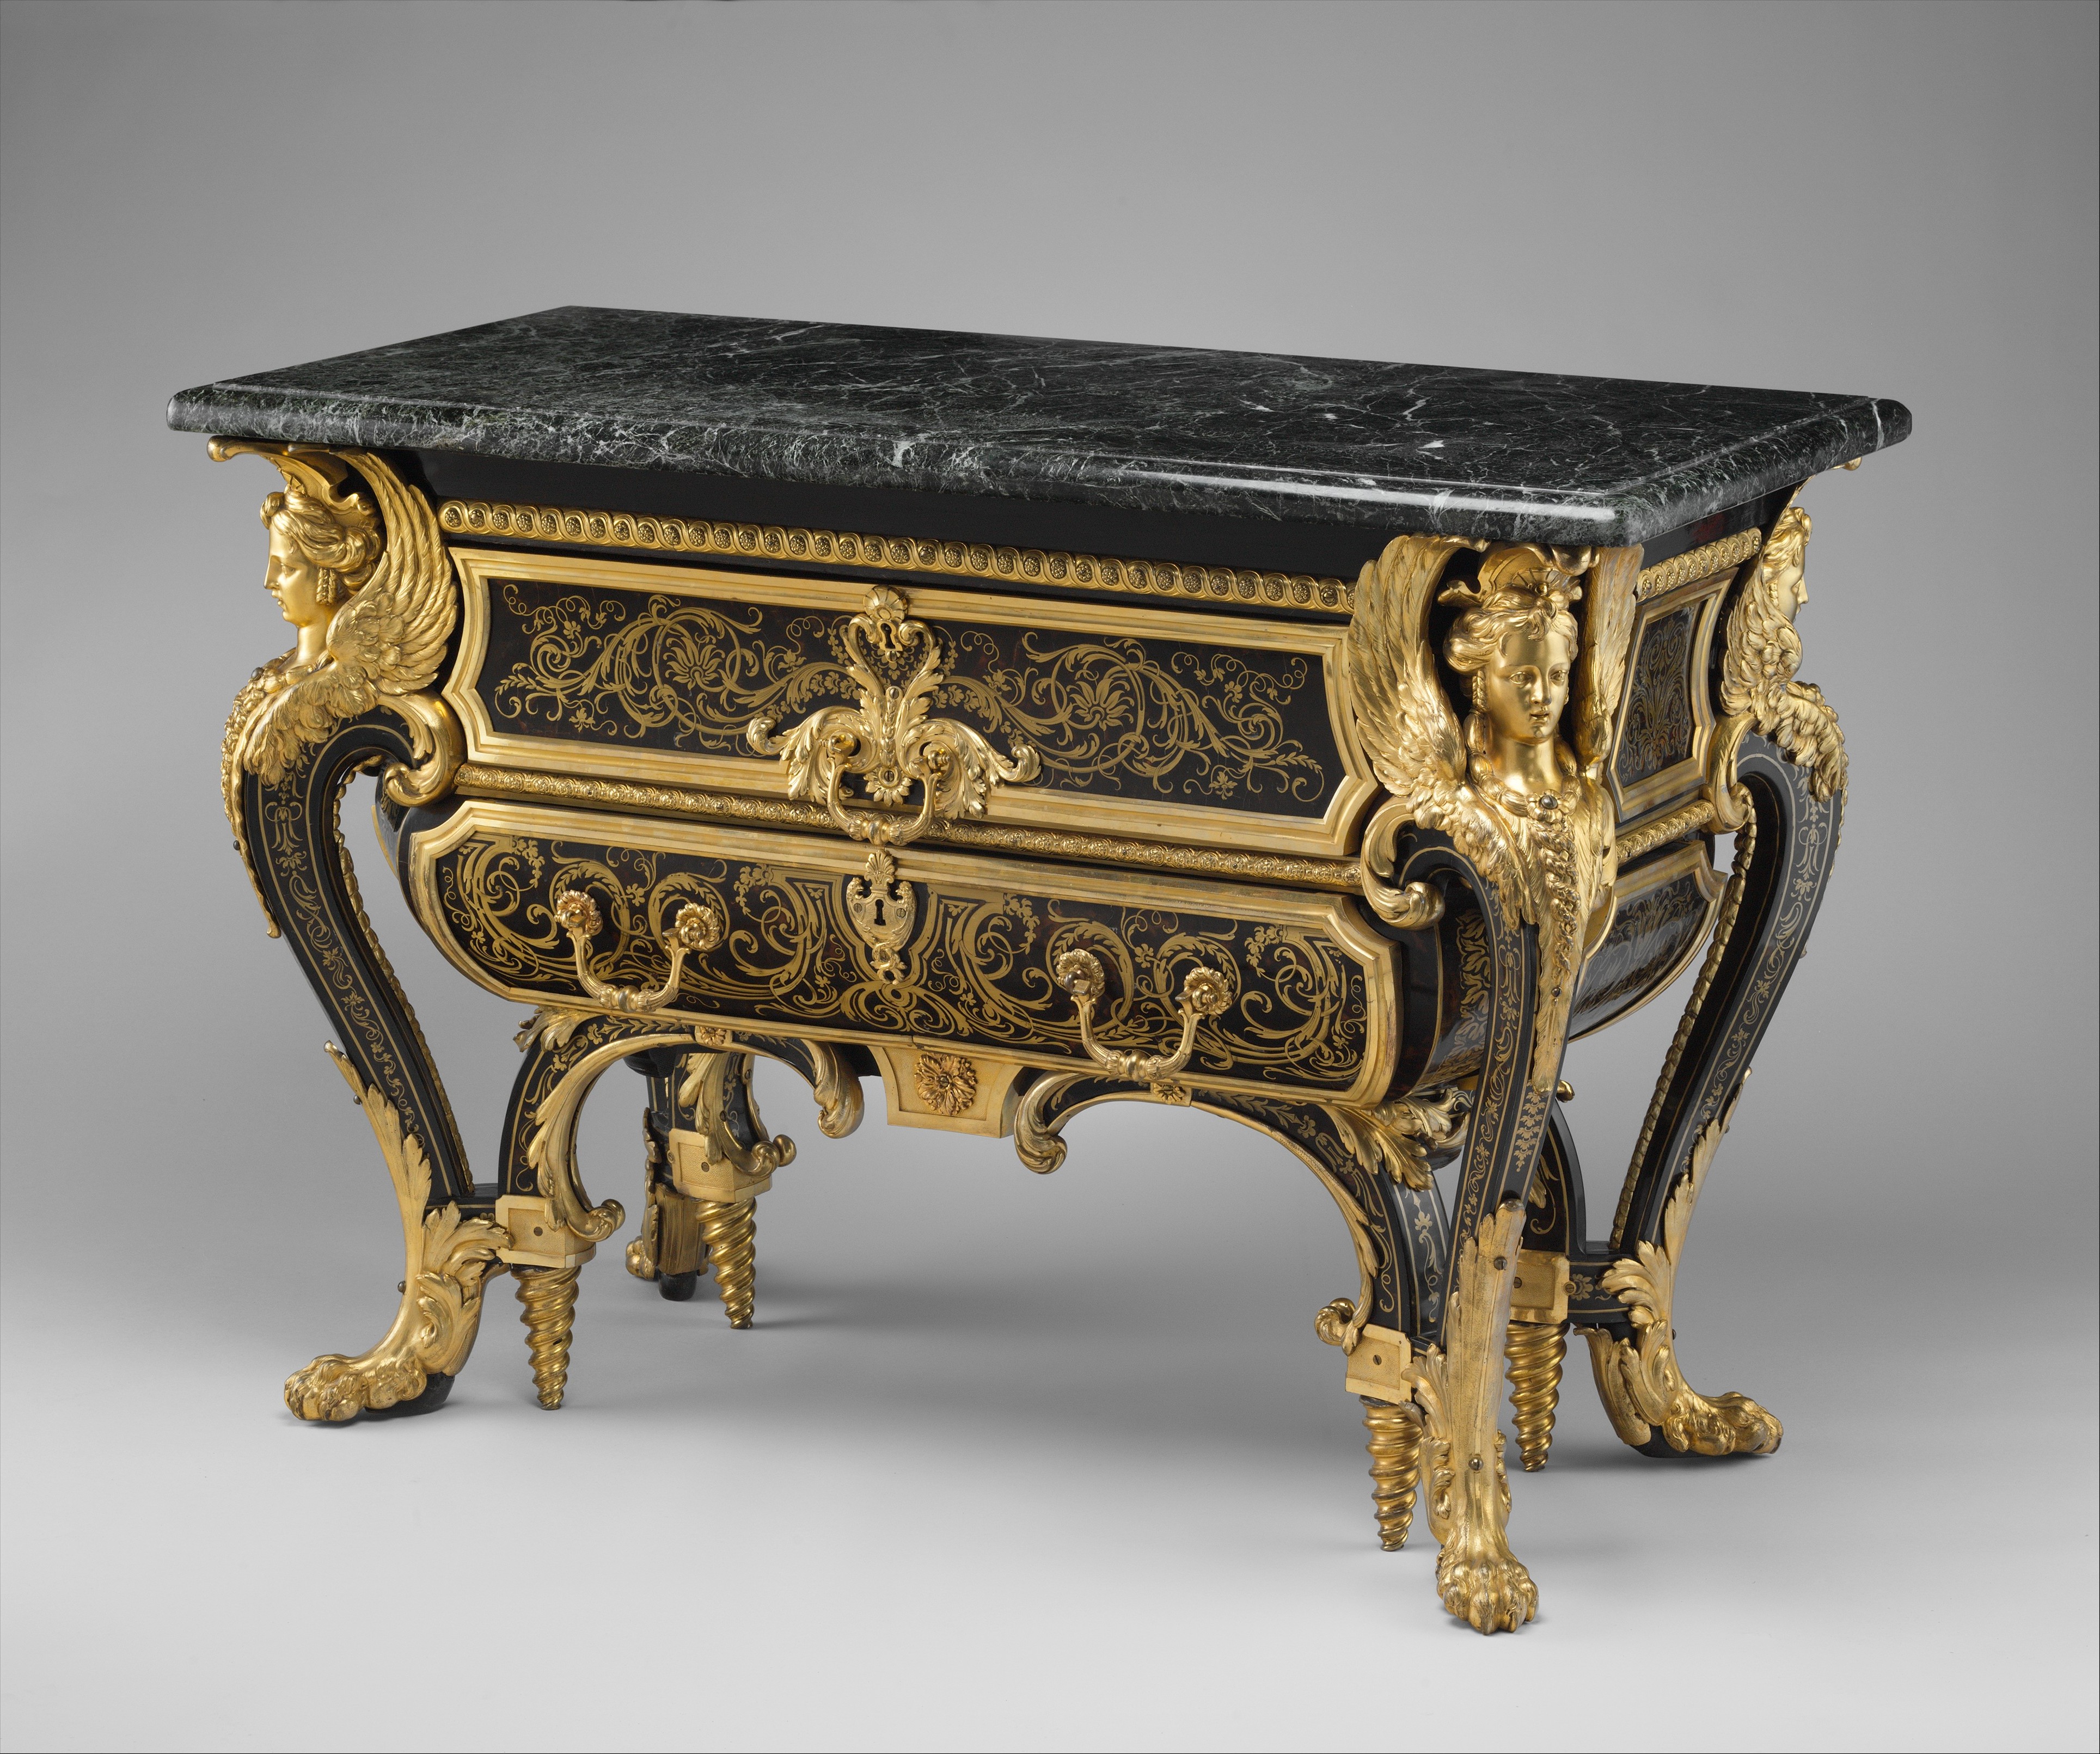 Commode Mazarine by André-Charles Boulle - 1708 - 87.6 × 128.3 × 62.9 cm Metropolitan Museum of Art